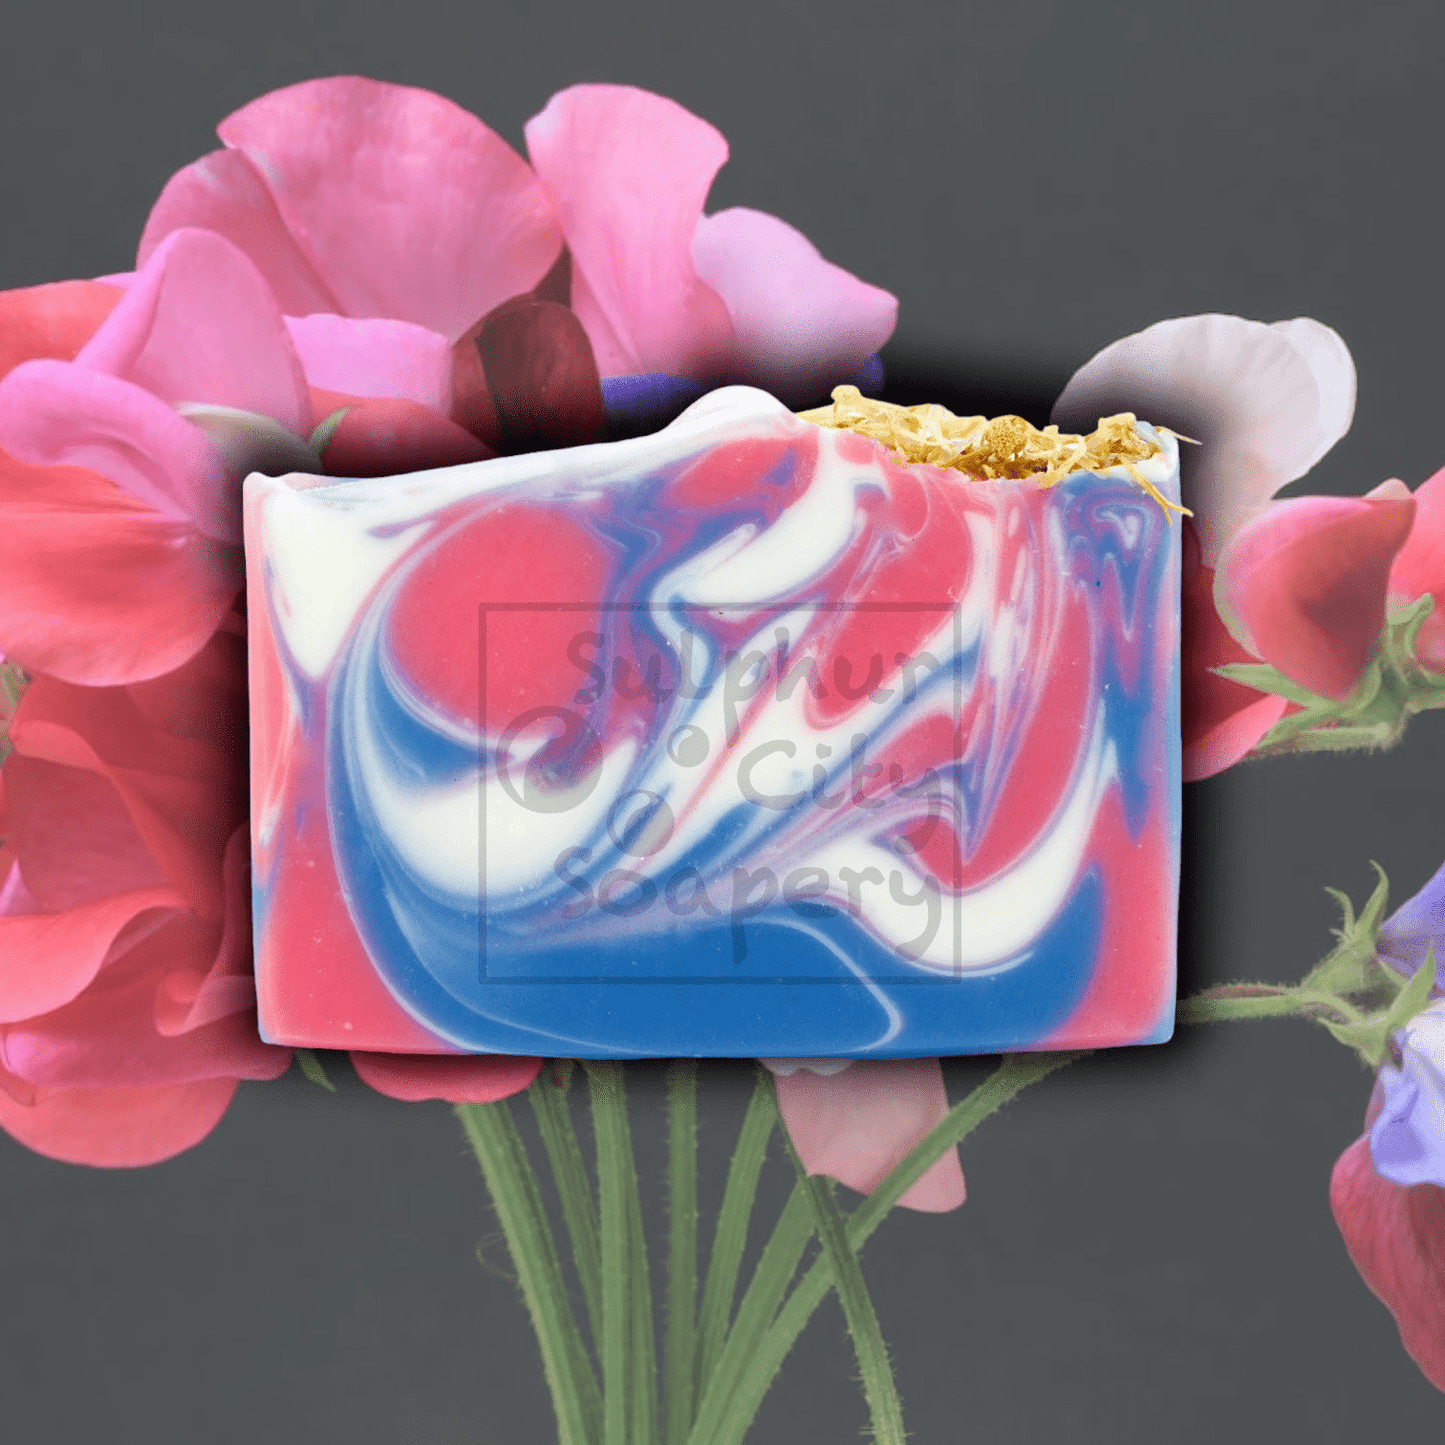 Sulphur City Soapery soap Sweet Pea scented soap.